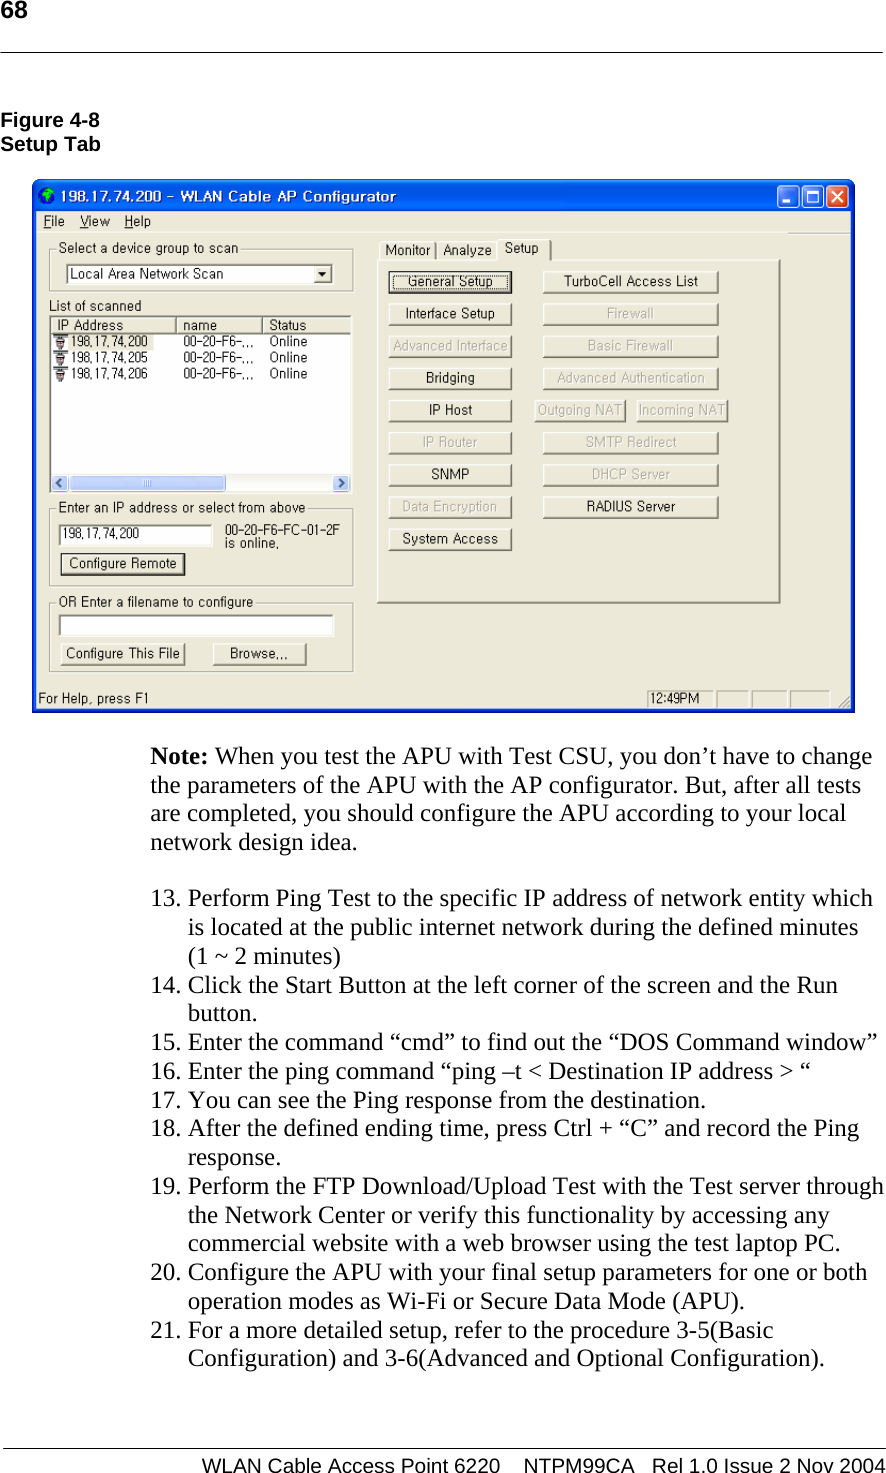   68  WLAN Cable Access Point 6220    NTPM99CA   Rel 1.0 Issue 2 Nov 2004 Figure 4-8 Setup Tab     Note: When you test the APU with Test CSU, you don’t have to change the parameters of the APU with the AP configurator. But, after all tests are completed, you should configure the APU according to your local network design idea.    13. Perform Ping Test to the specific IP address of network entity which is located at the public internet network during the defined minutes  (1 ~ 2 minutes)  14. Click the Start Button at the left corner of the screen and the Run button.  15. Enter the command “cmd” to find out the “DOS Command window” 16. Enter the ping command “ping –t &lt; Destination IP address &gt; “  17. You can see the Ping response from the destination. 18. After the defined ending time, press Ctrl + “C” and record the Ping response. 19. Perform the FTP Download/Upload Test with the Test server through the Network Center or verify this functionality by accessing any commercial website with a web browser using the test laptop PC. 20. Configure the APU with your final setup parameters for one or both operation modes as Wi-Fi or Secure Data Mode (APU). 21. For a more detailed setup, refer to the procedure 3-5(Basic Configuration) and 3-6(Advanced and Optional Configuration).  